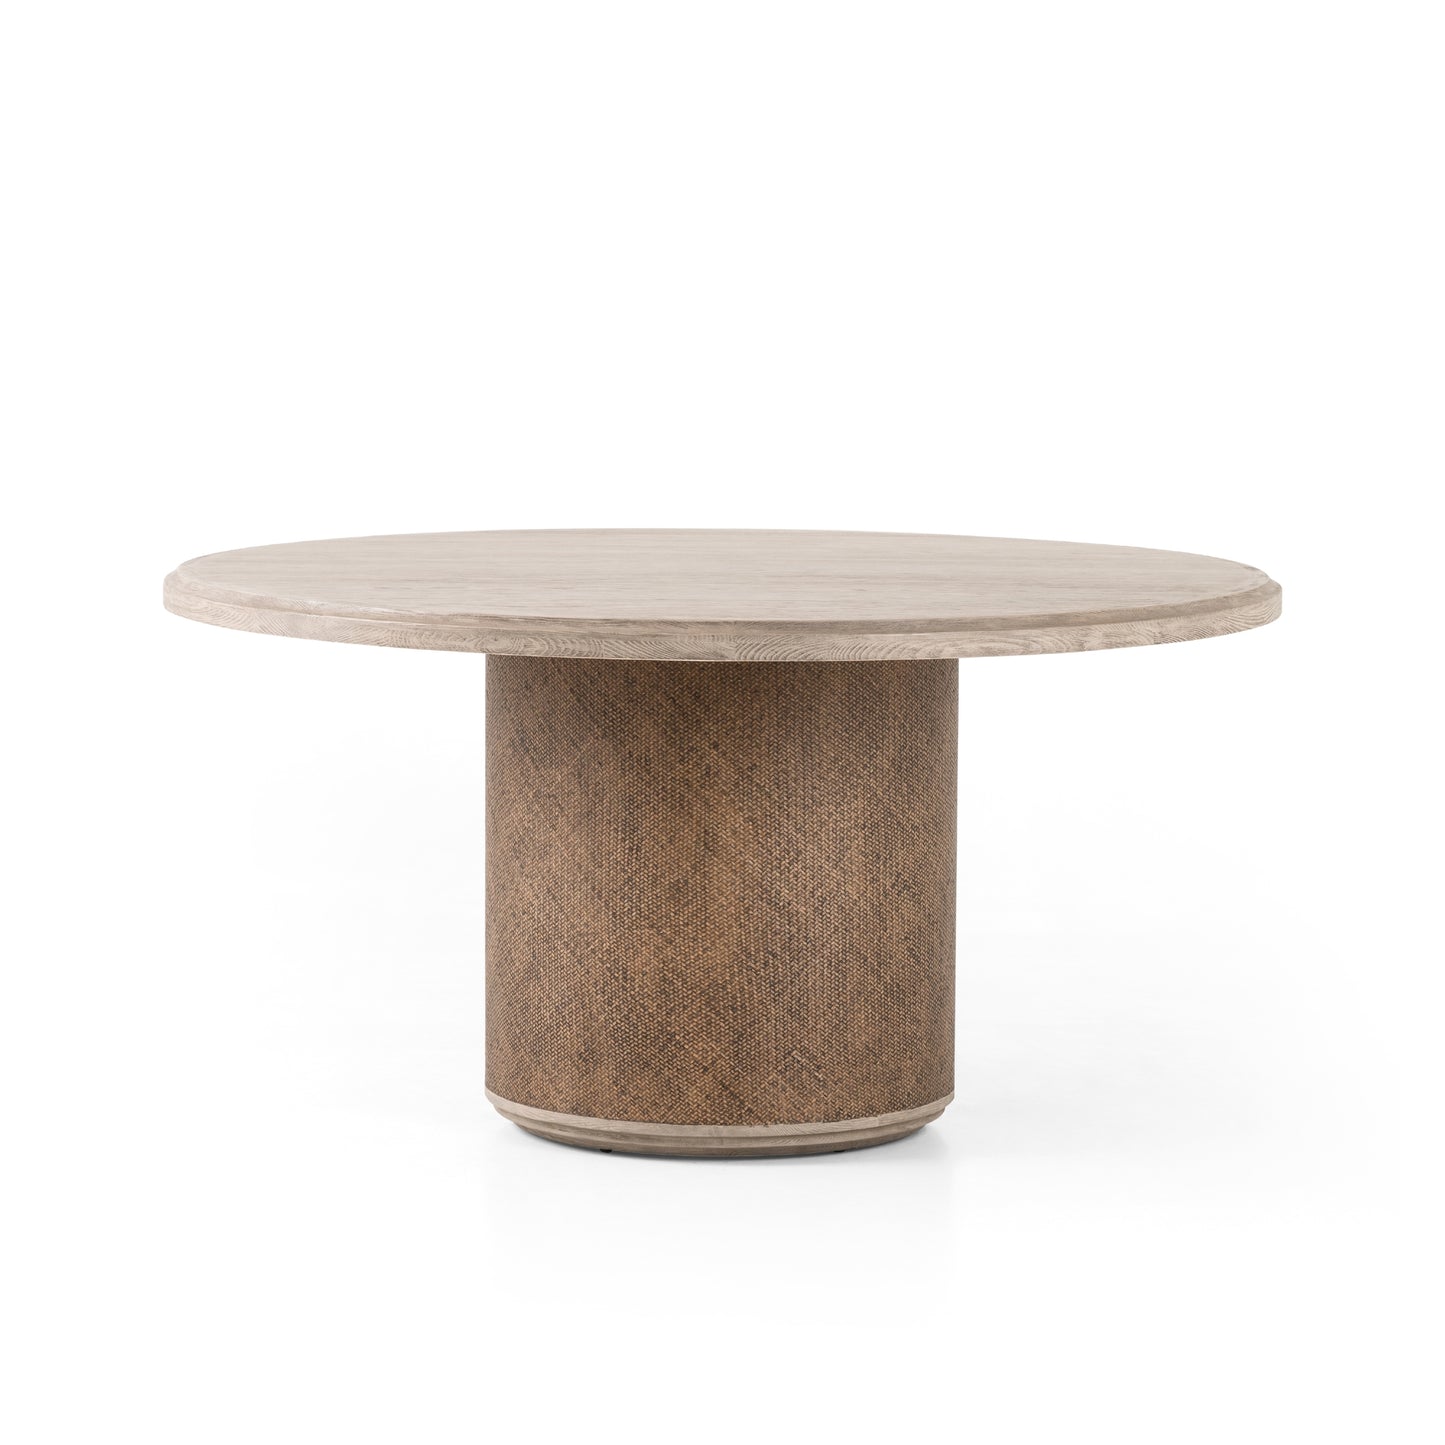 SYCAMORE DINING TABLE